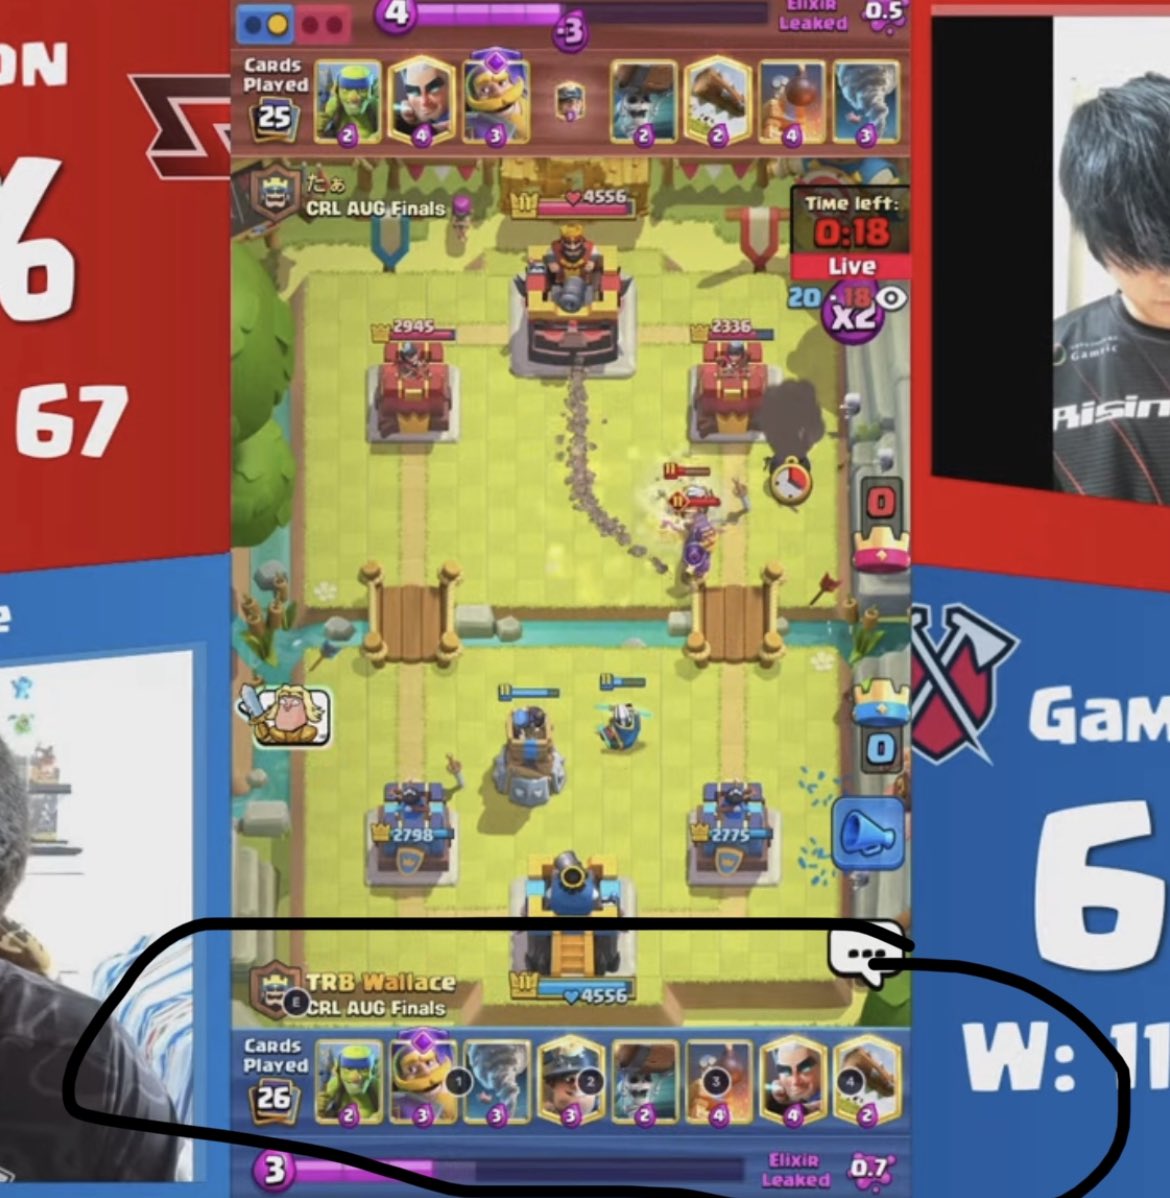 Official broadcast has the bluestacks keybinds on the screen 😭isnt bluestacks supposed to be against the CR TOS? and they using it on the official broadcast is crazy.